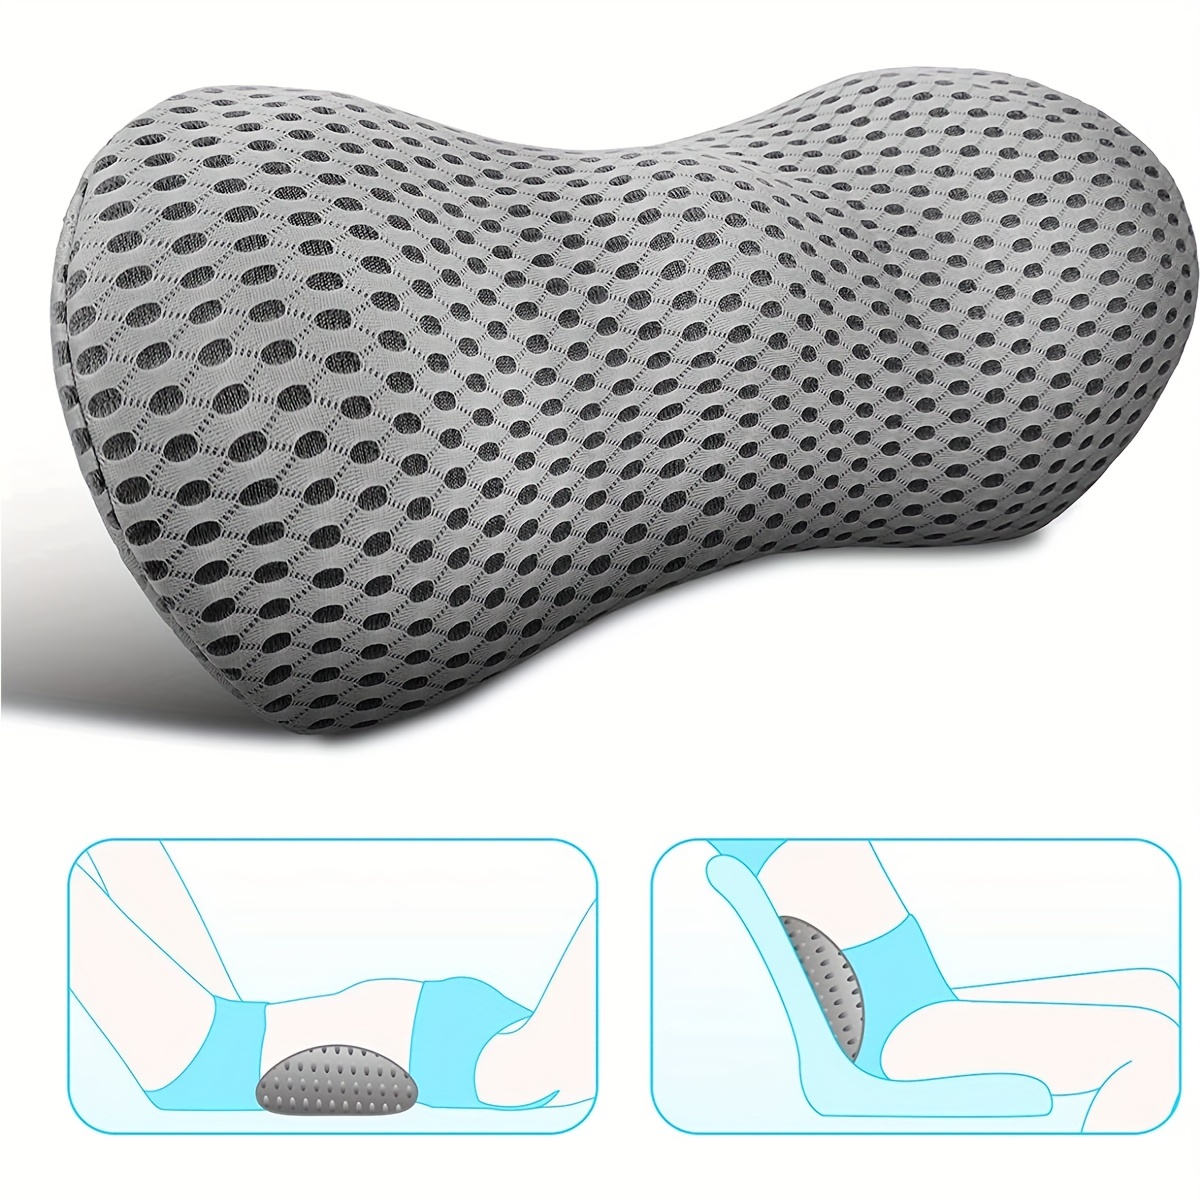 CushZone Seat Cushion, Lumbar Support Pillow with Adjustable Strap-Chair  Cushions for Sciatica Pain Relief-with Washable Cover Memory Foam for Car